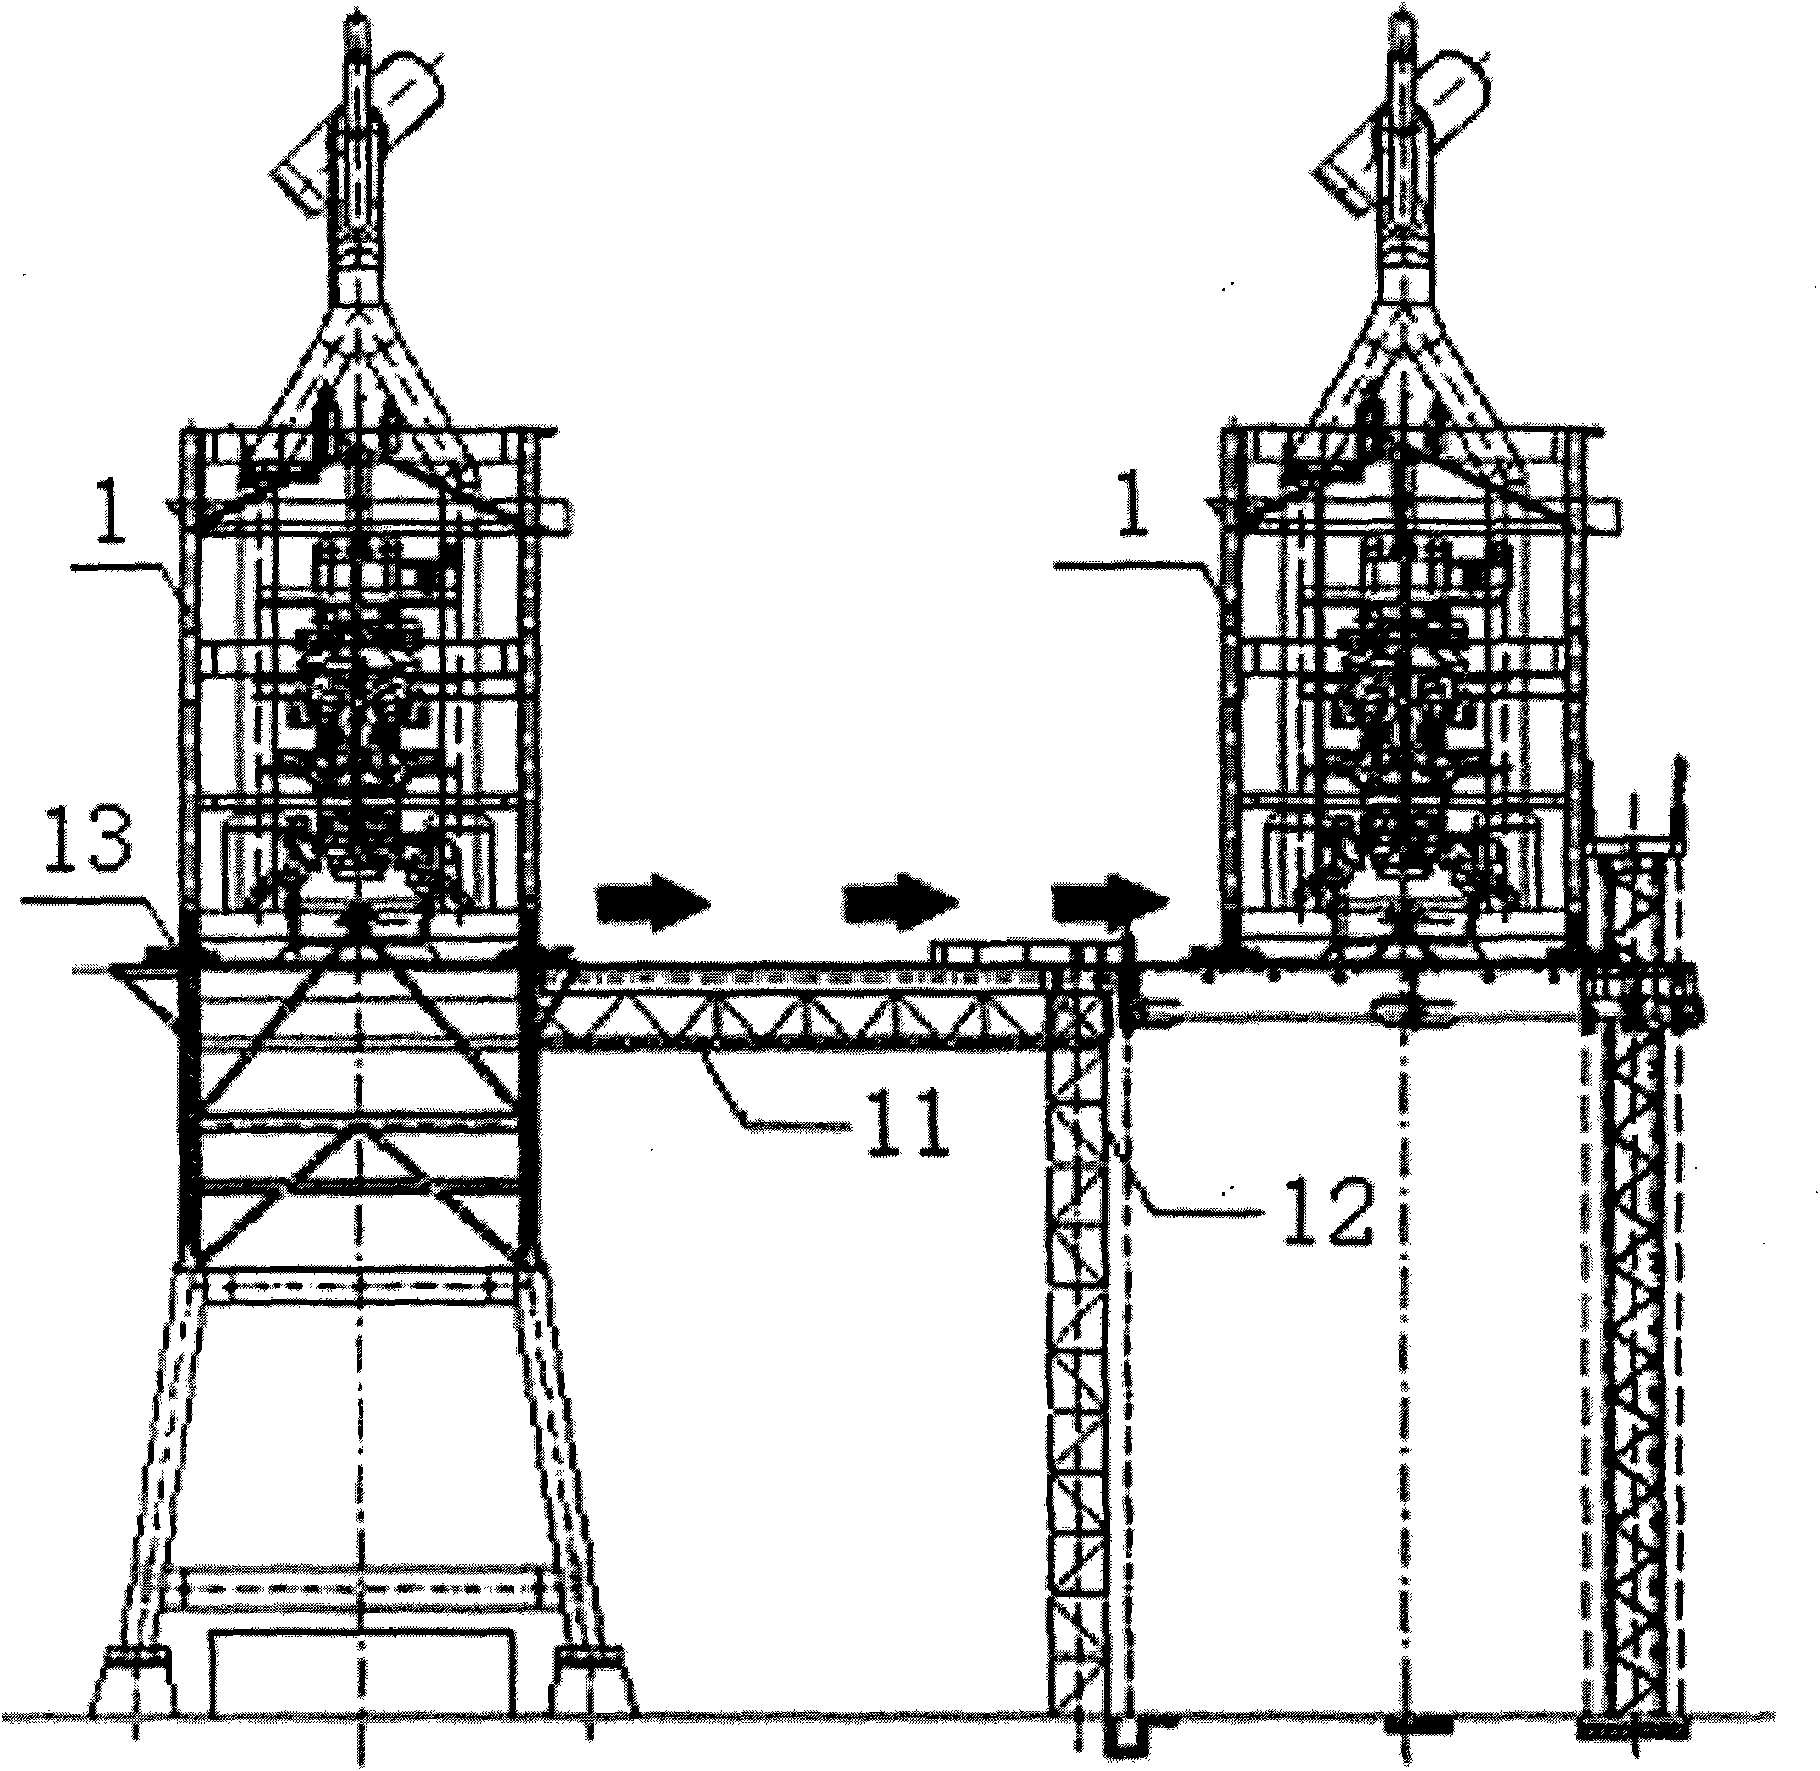 Modularized and integrative disassembling and installing methods for blast furnace